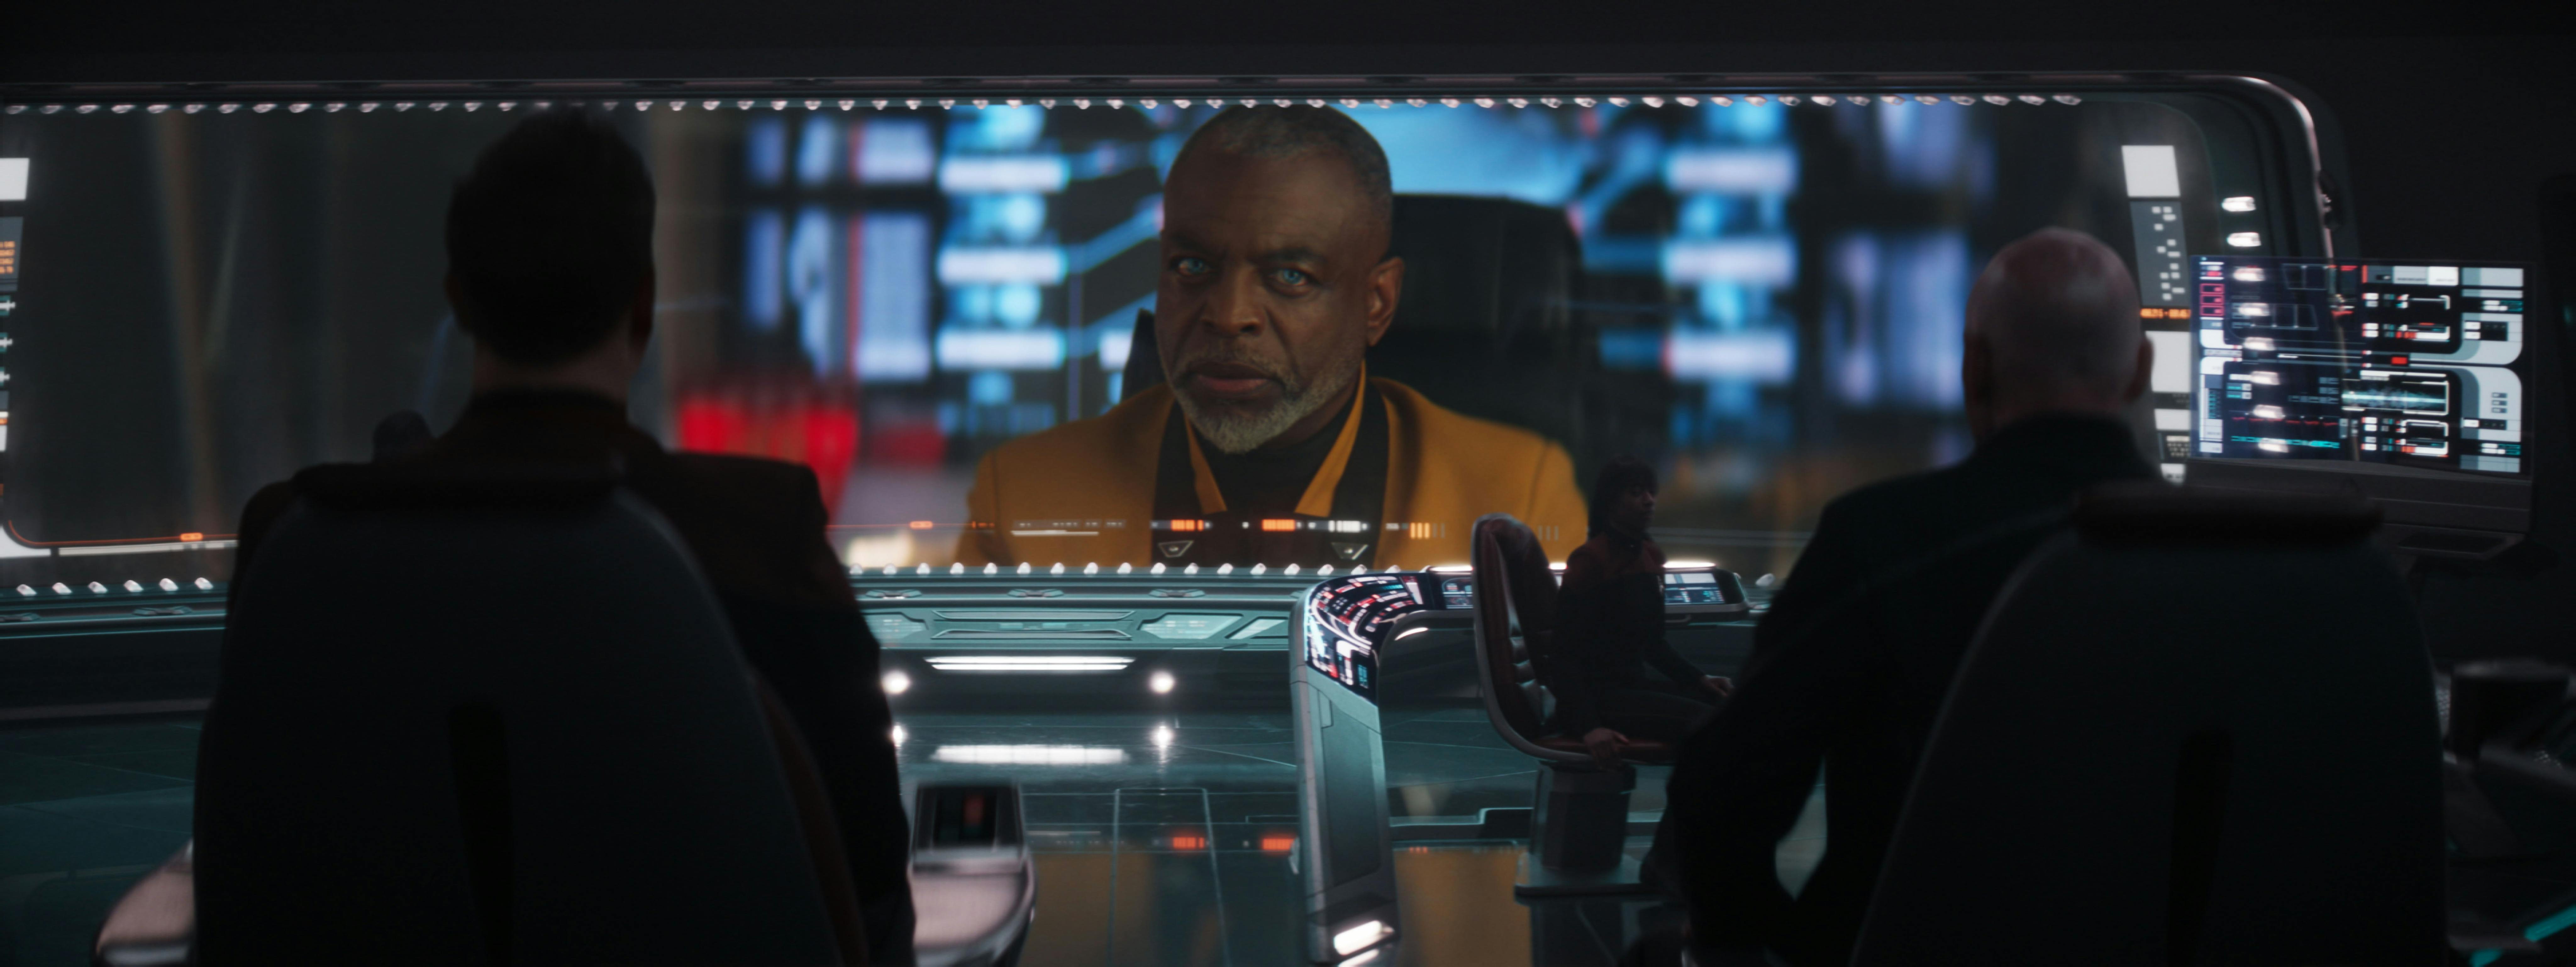 Shaw and Picard talk to Commodore Geordi La Forge on the Titan's viewscreen